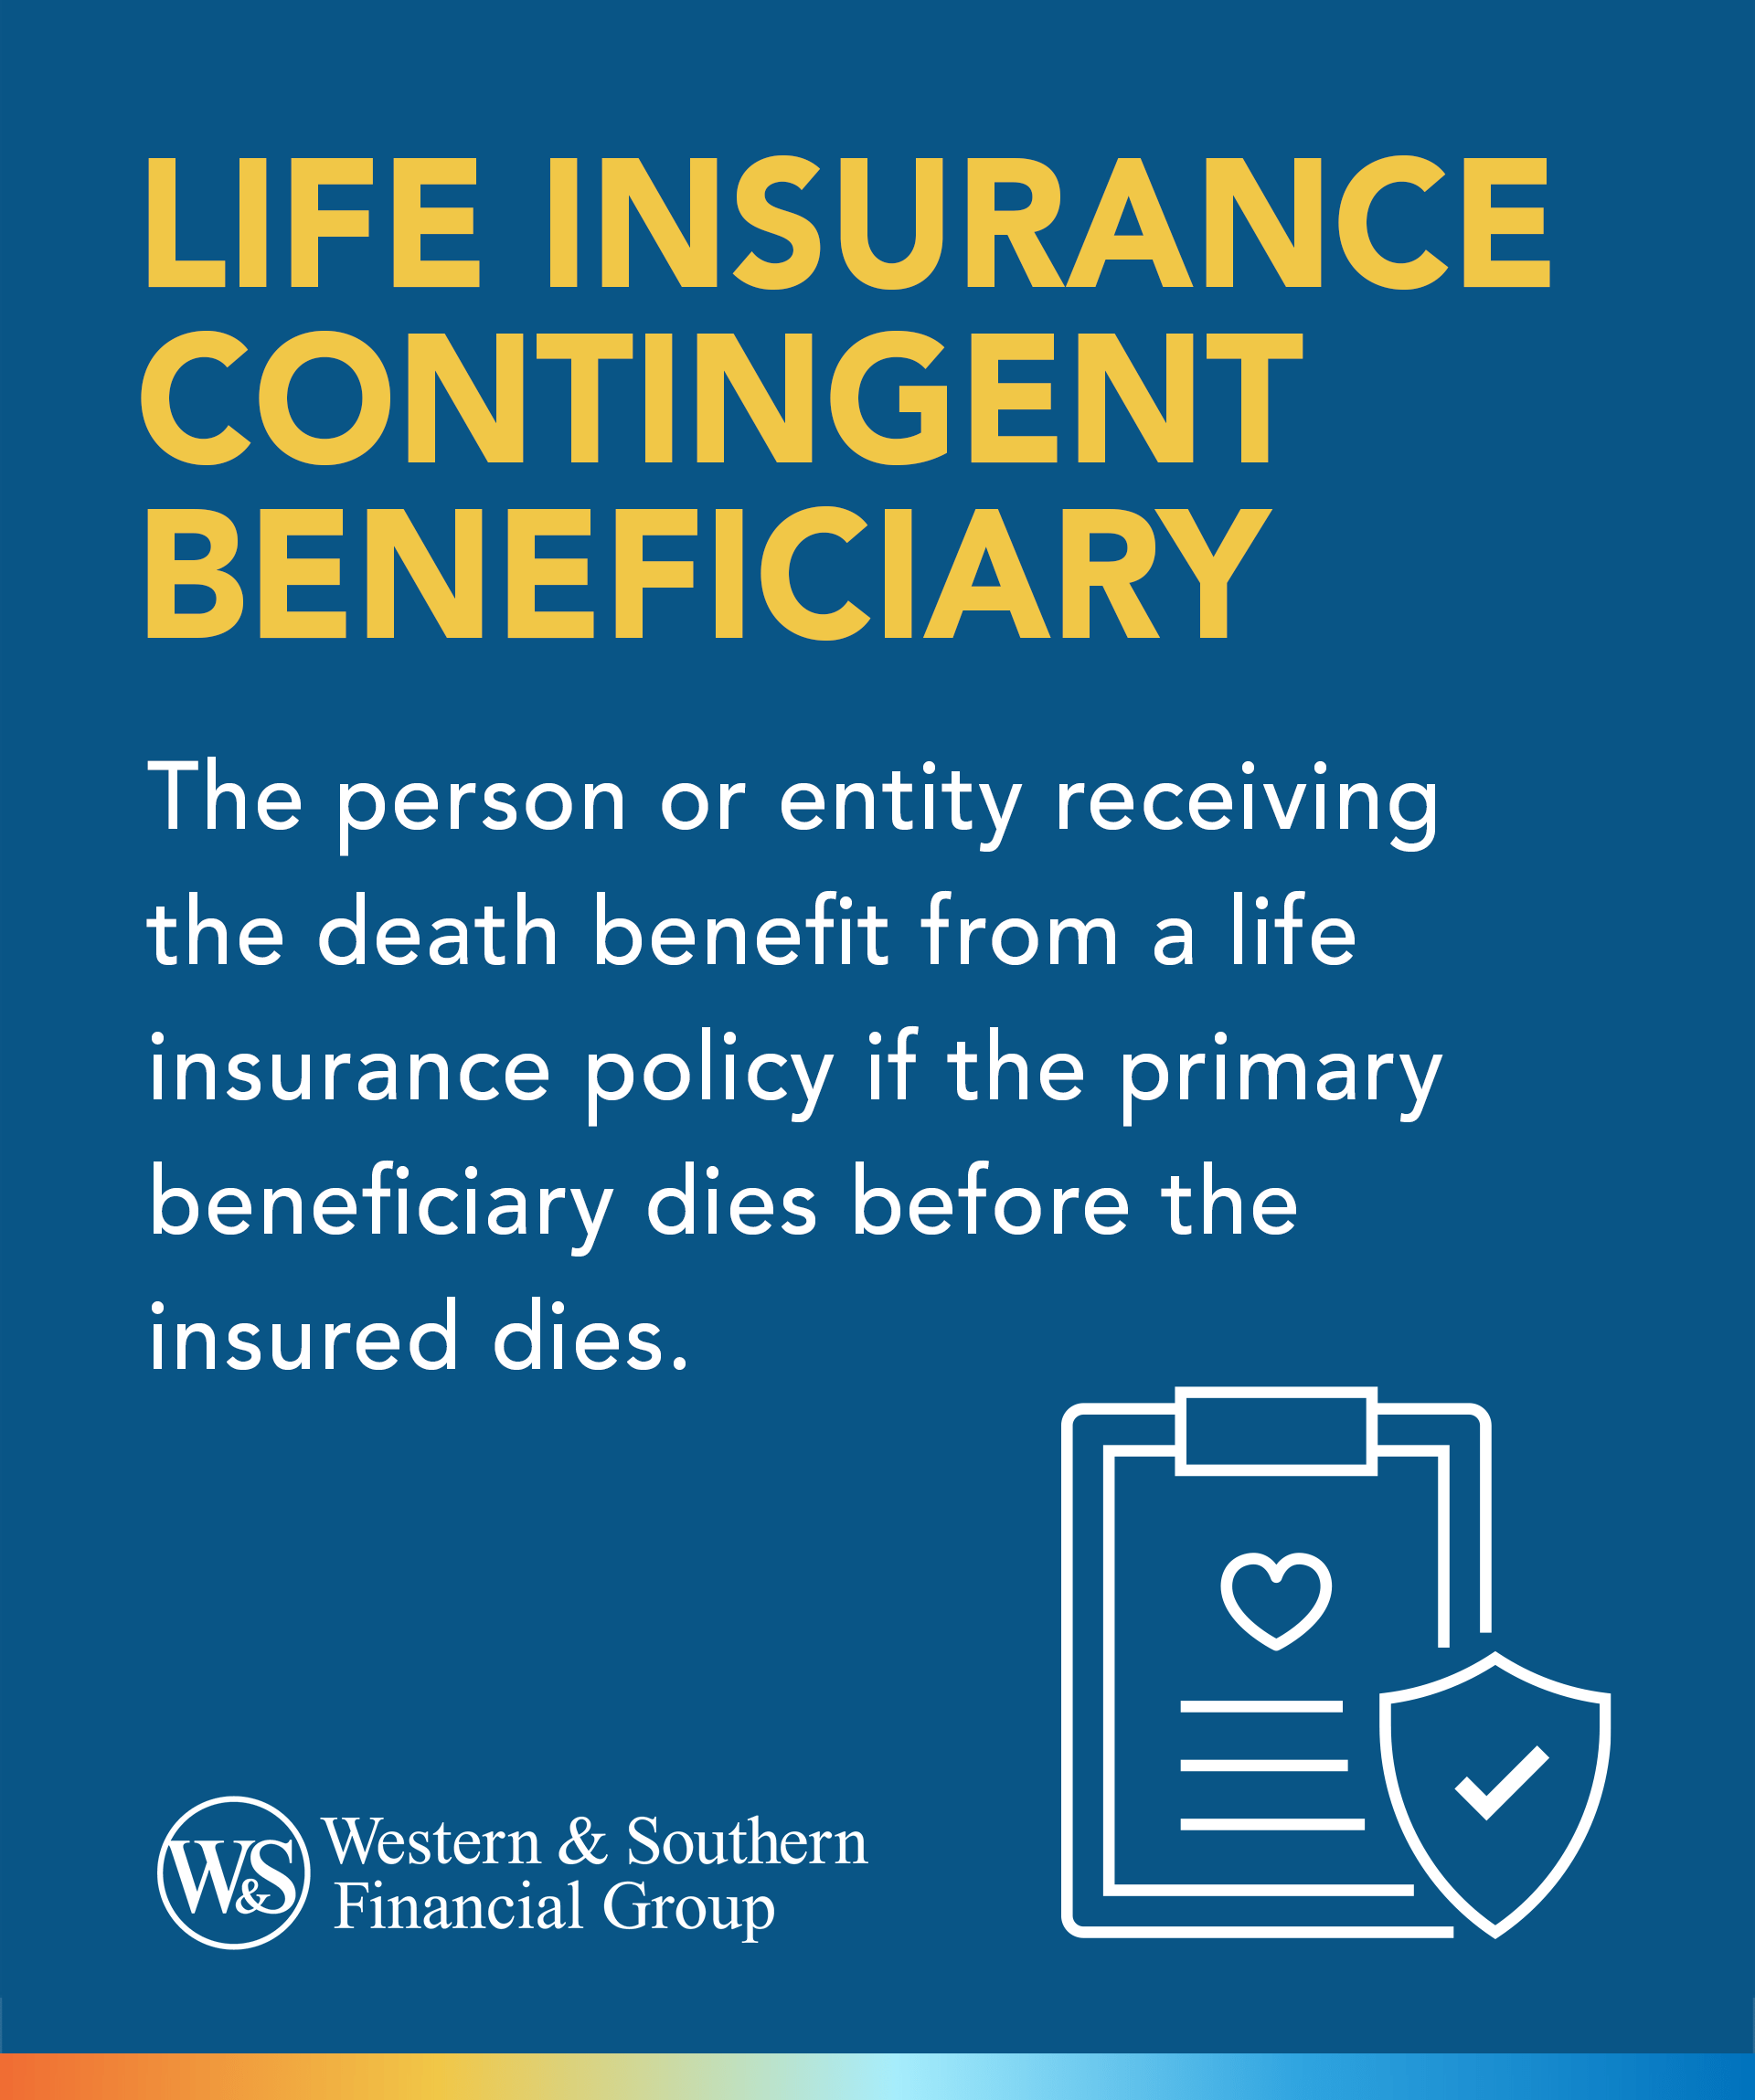 Life Insurance Contingent Beneficiary Definition